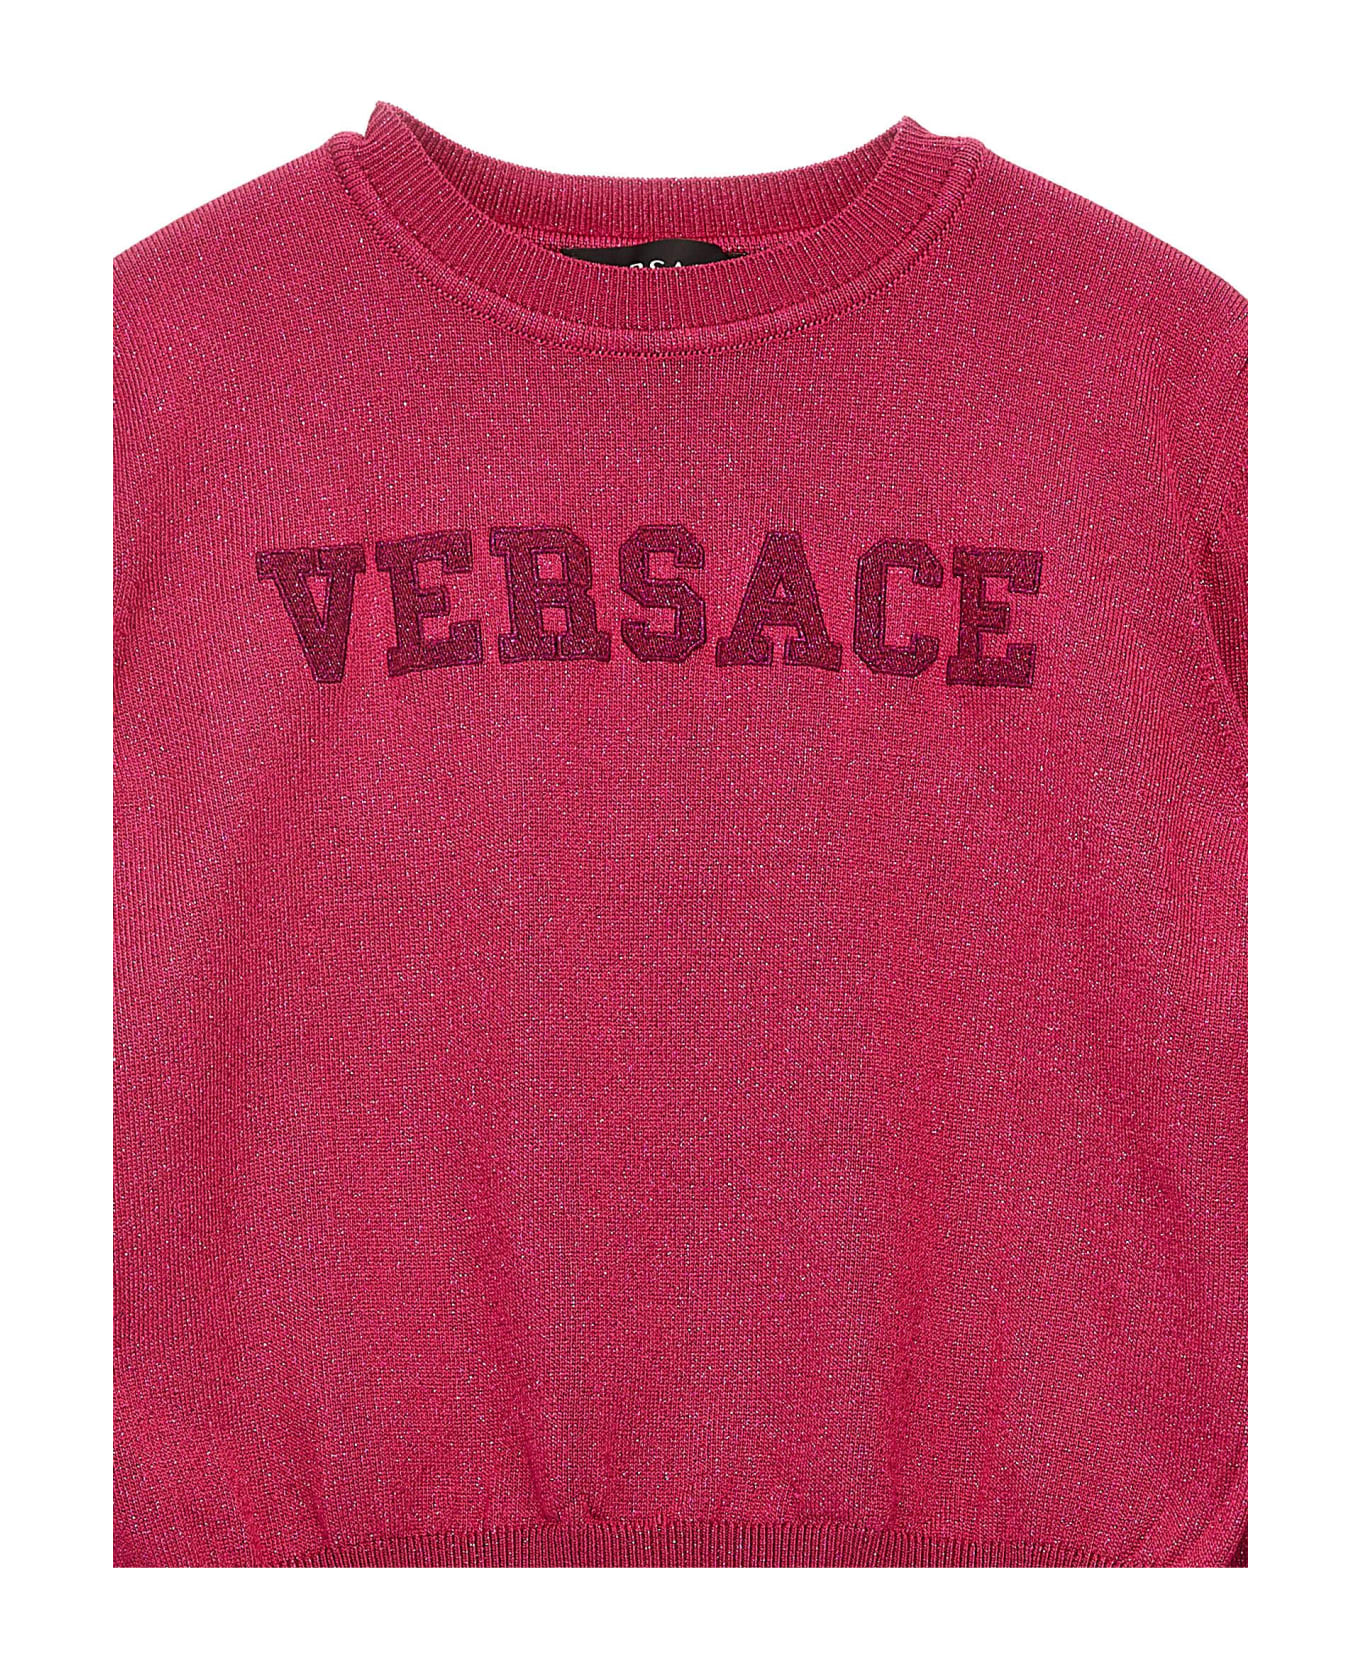 Young Versace Logo Embroidery Sweater - Fuxia Lurex ニットウェア＆スウェットシャツ